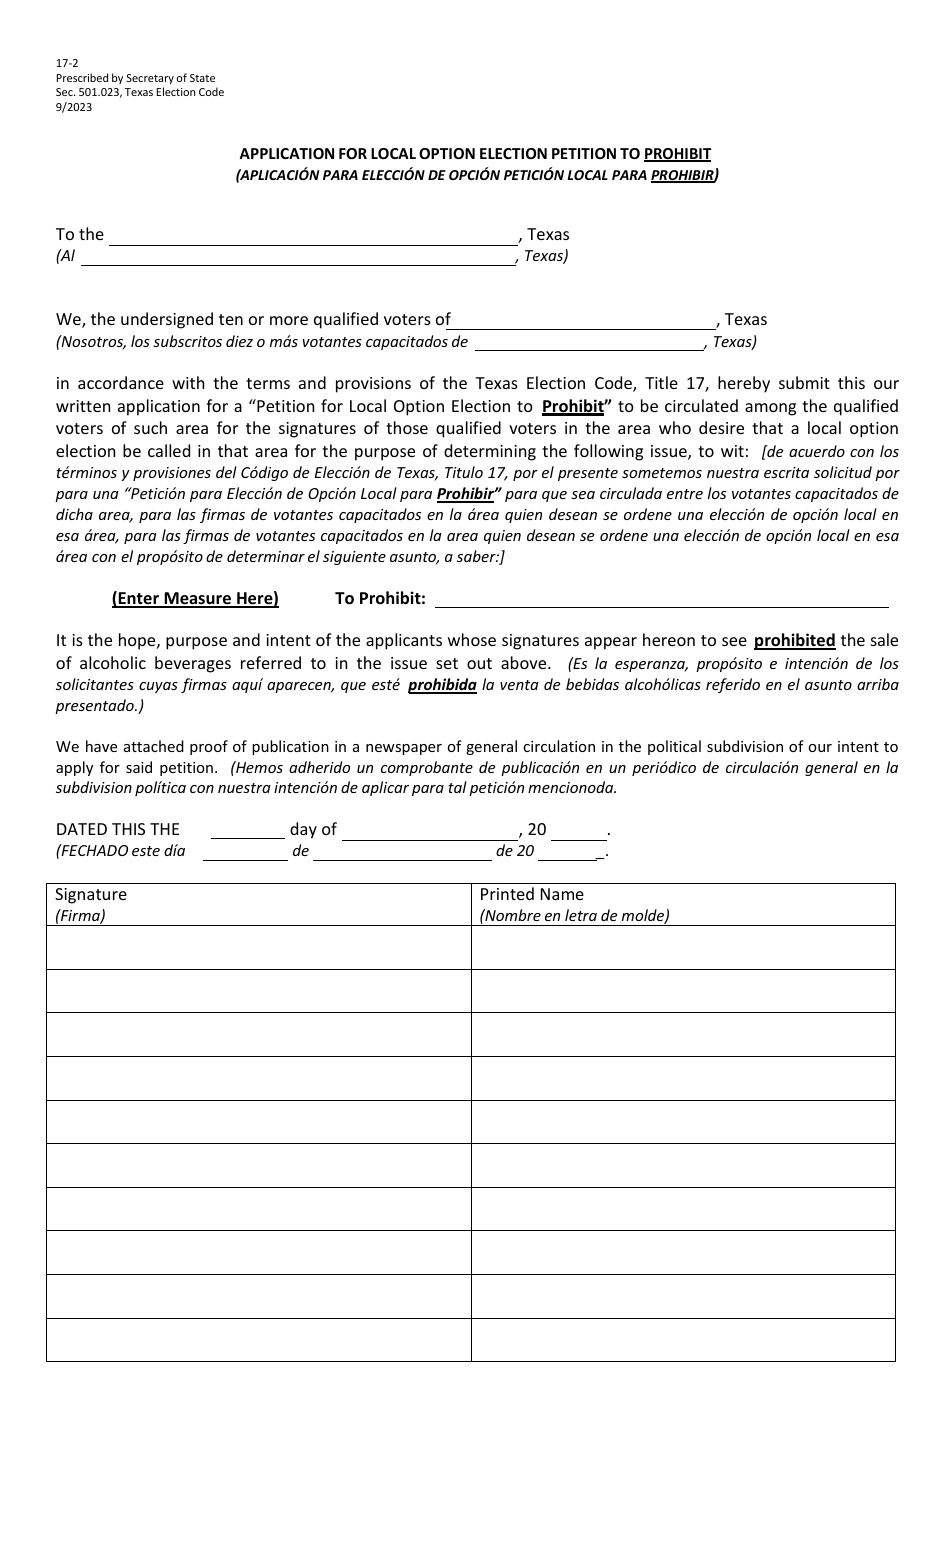 Form 17-2 Application for Local Option Election Petition to Prohibit - Texas (English / Spanish), Page 1